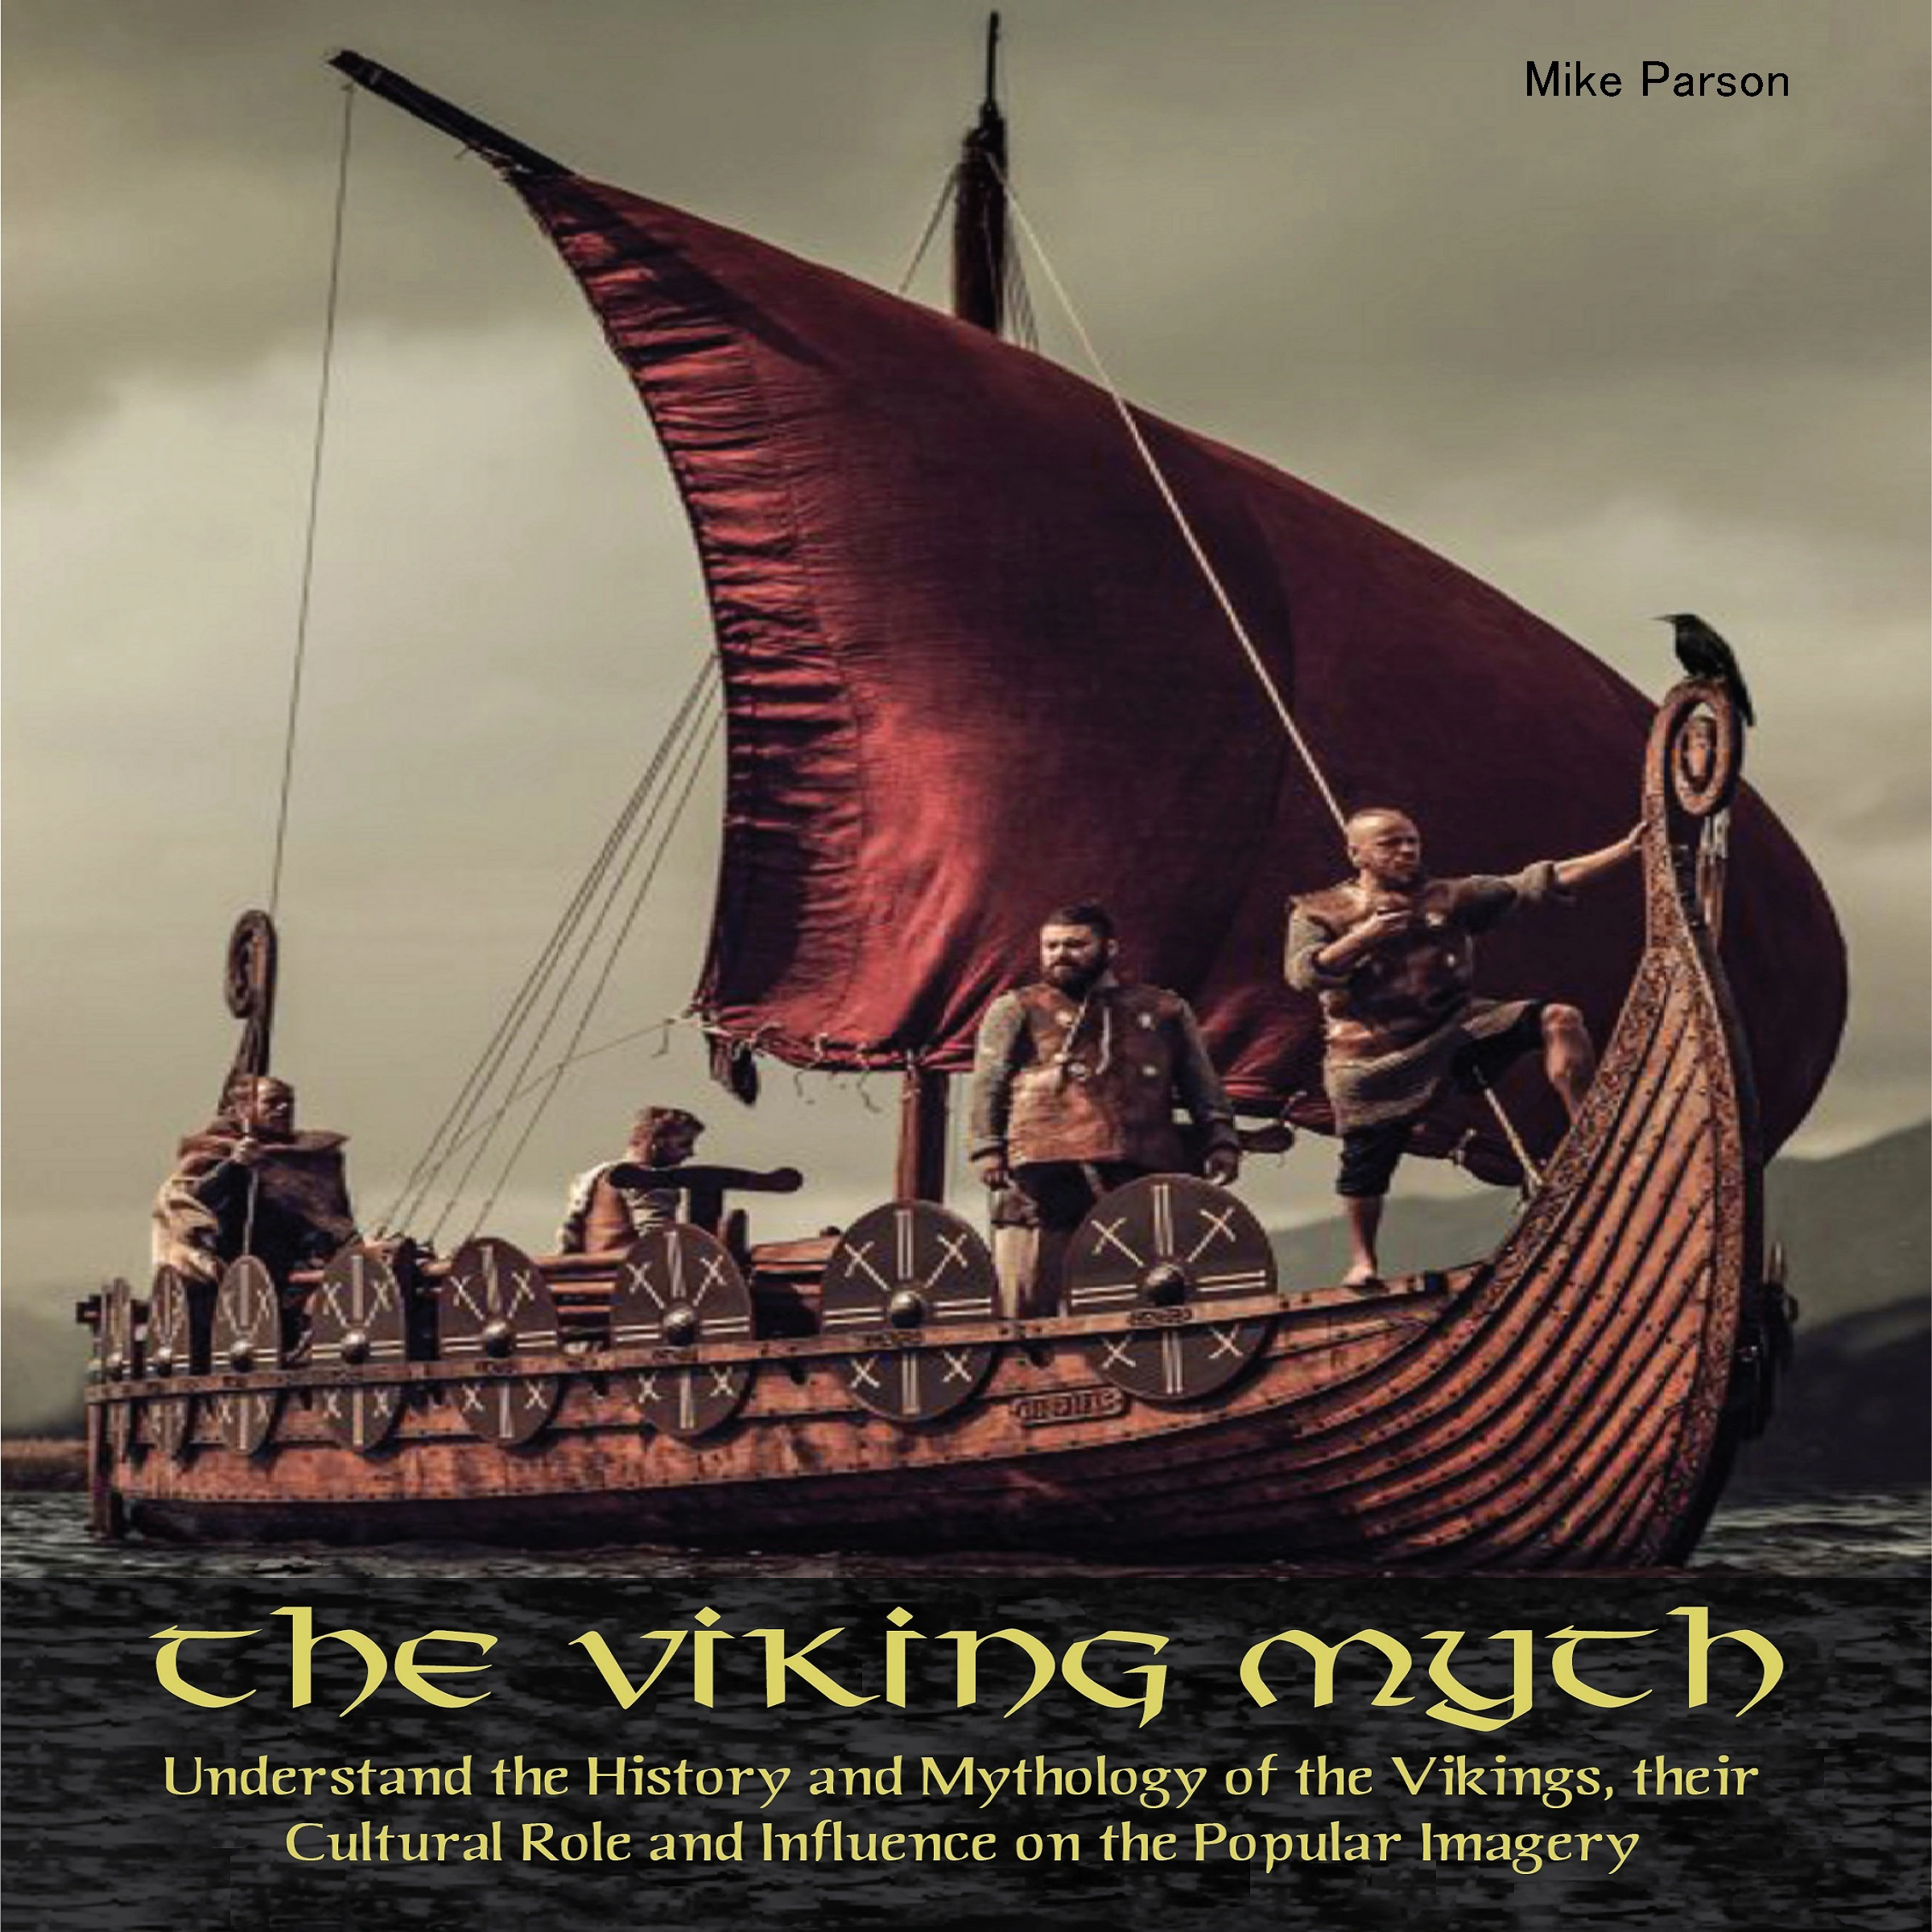 The Viking Myth by Mike Parson Audiobook